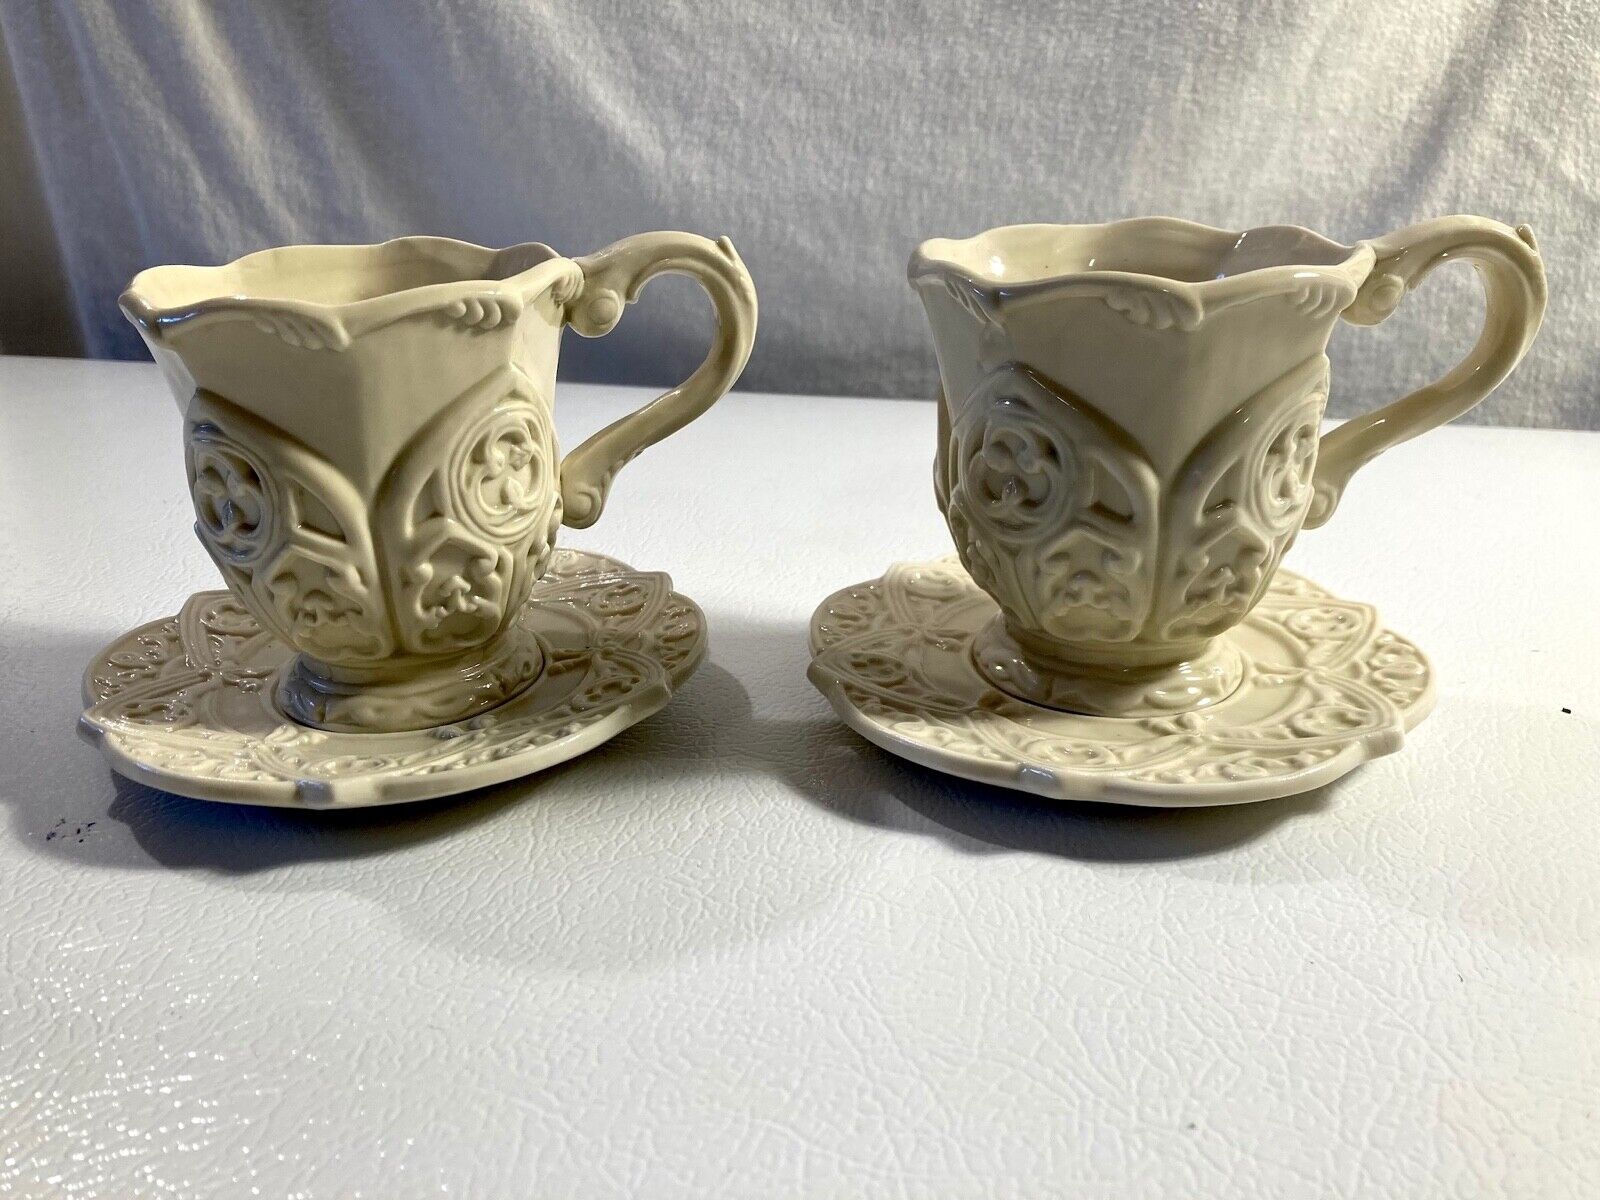 Set of 2 V&A Museum London Gothic Cathedral Tea Cups & Saucers Victoria & Albert